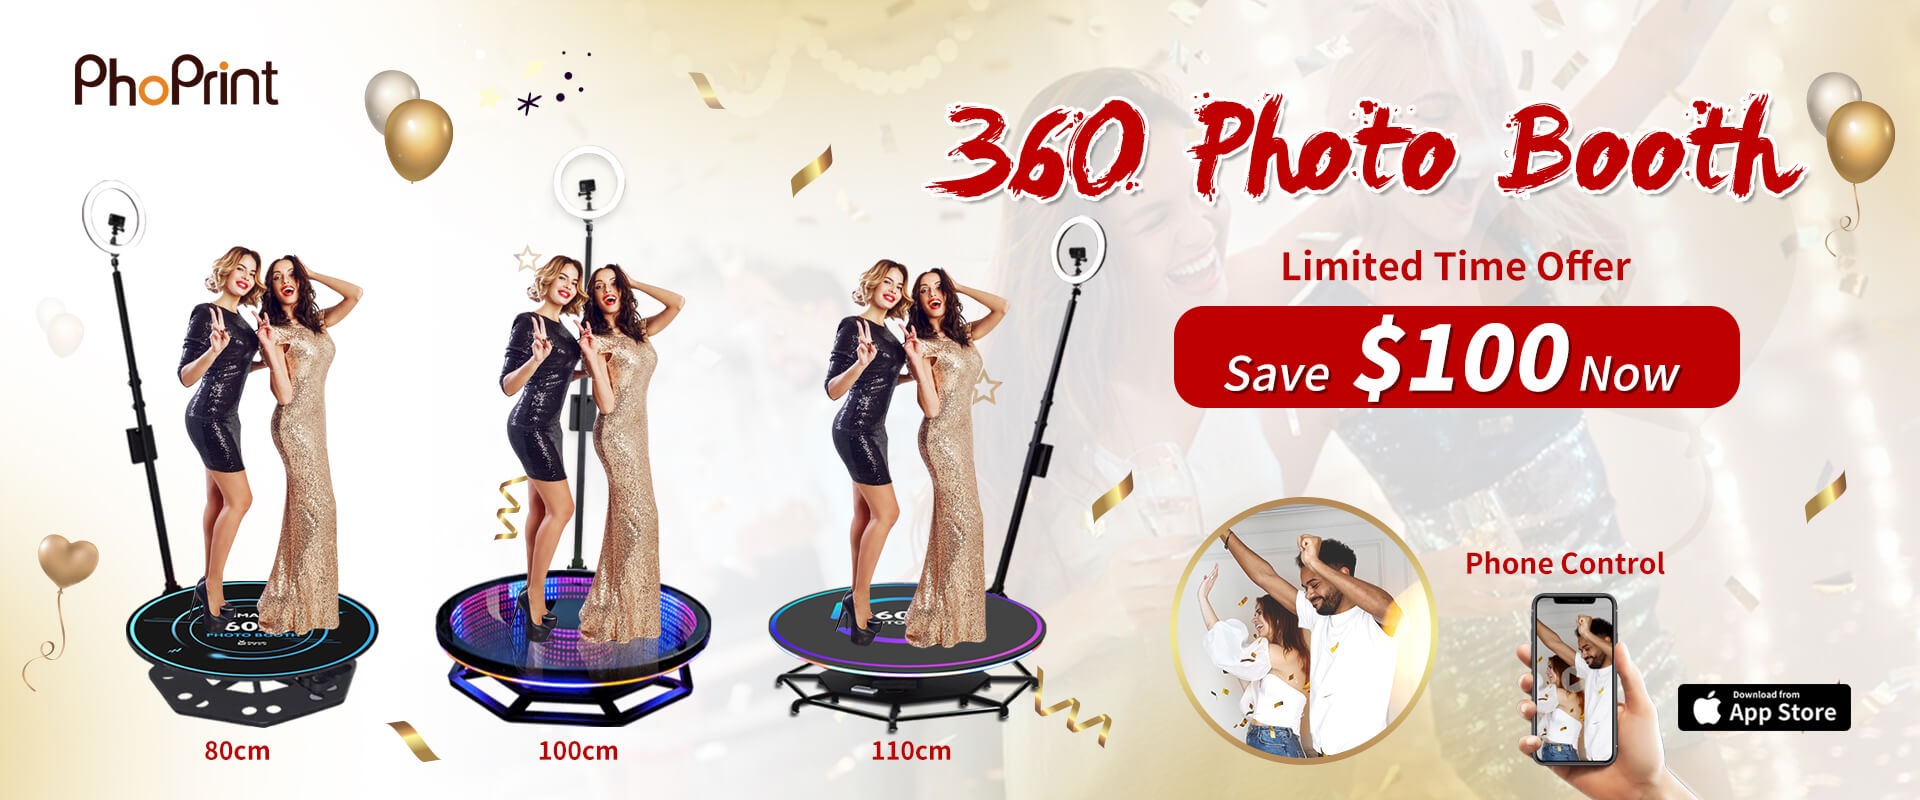 360 Photo booth for sale factory